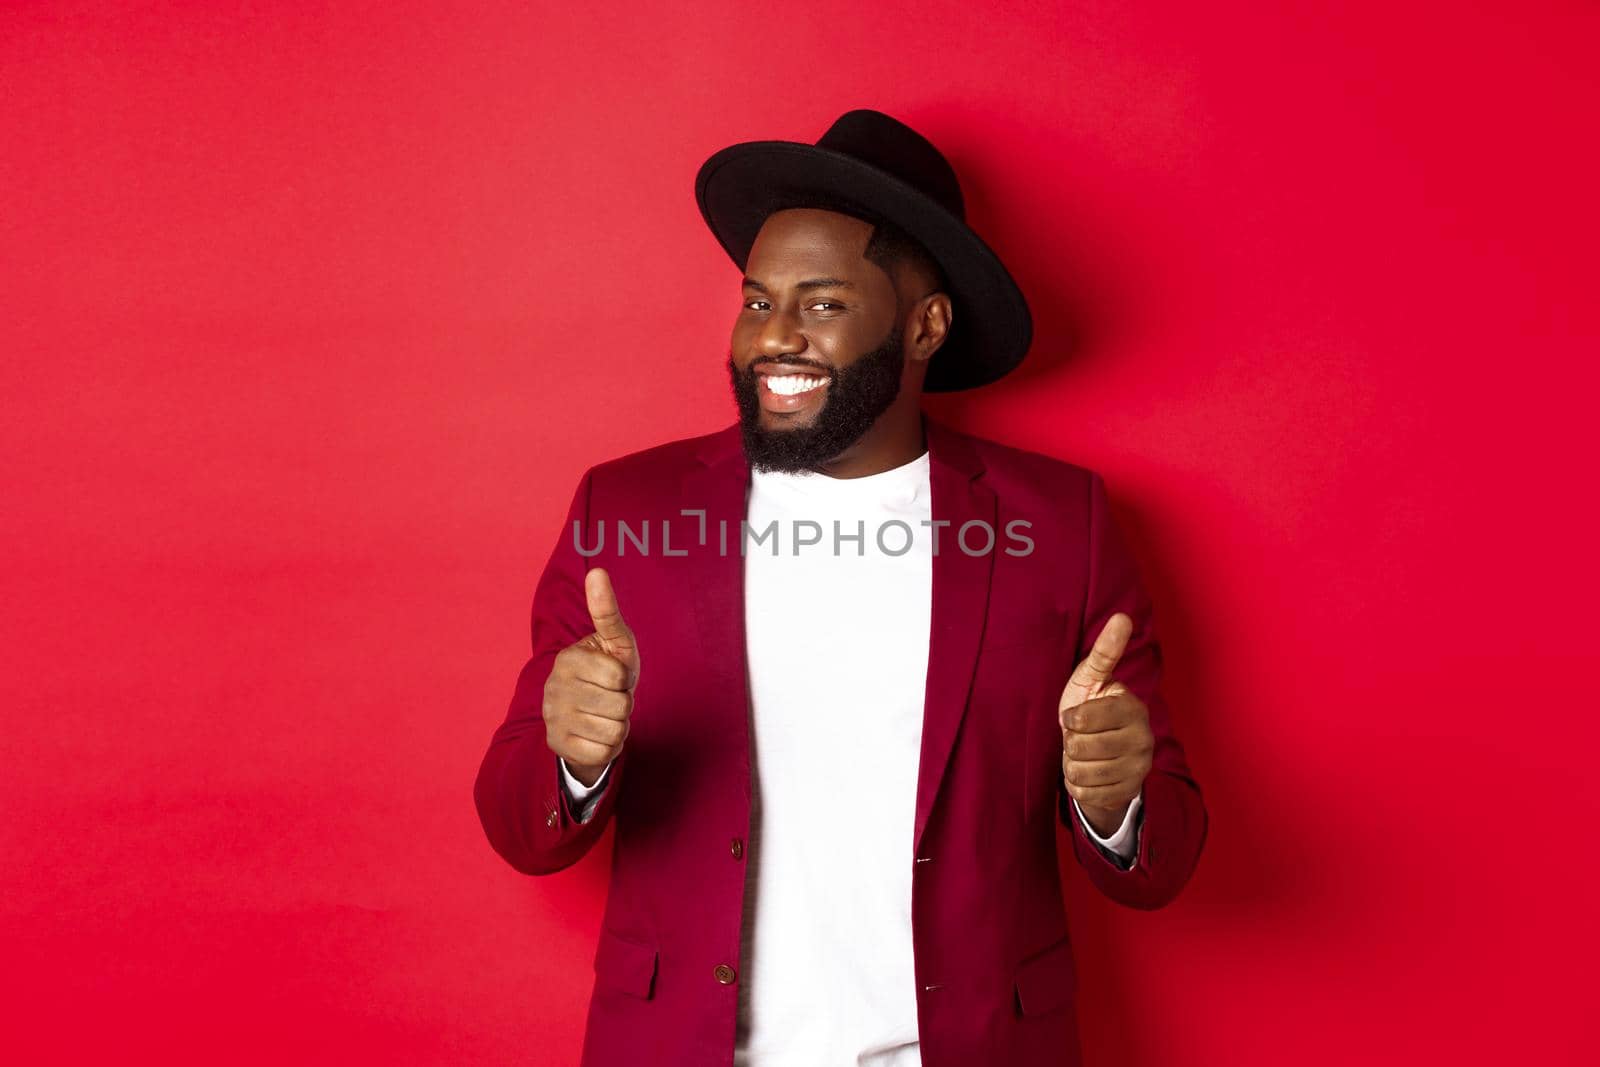 Cheerful Black man having fun on party, showing thumbs up in approval, smiling and liking something, standing against red background.